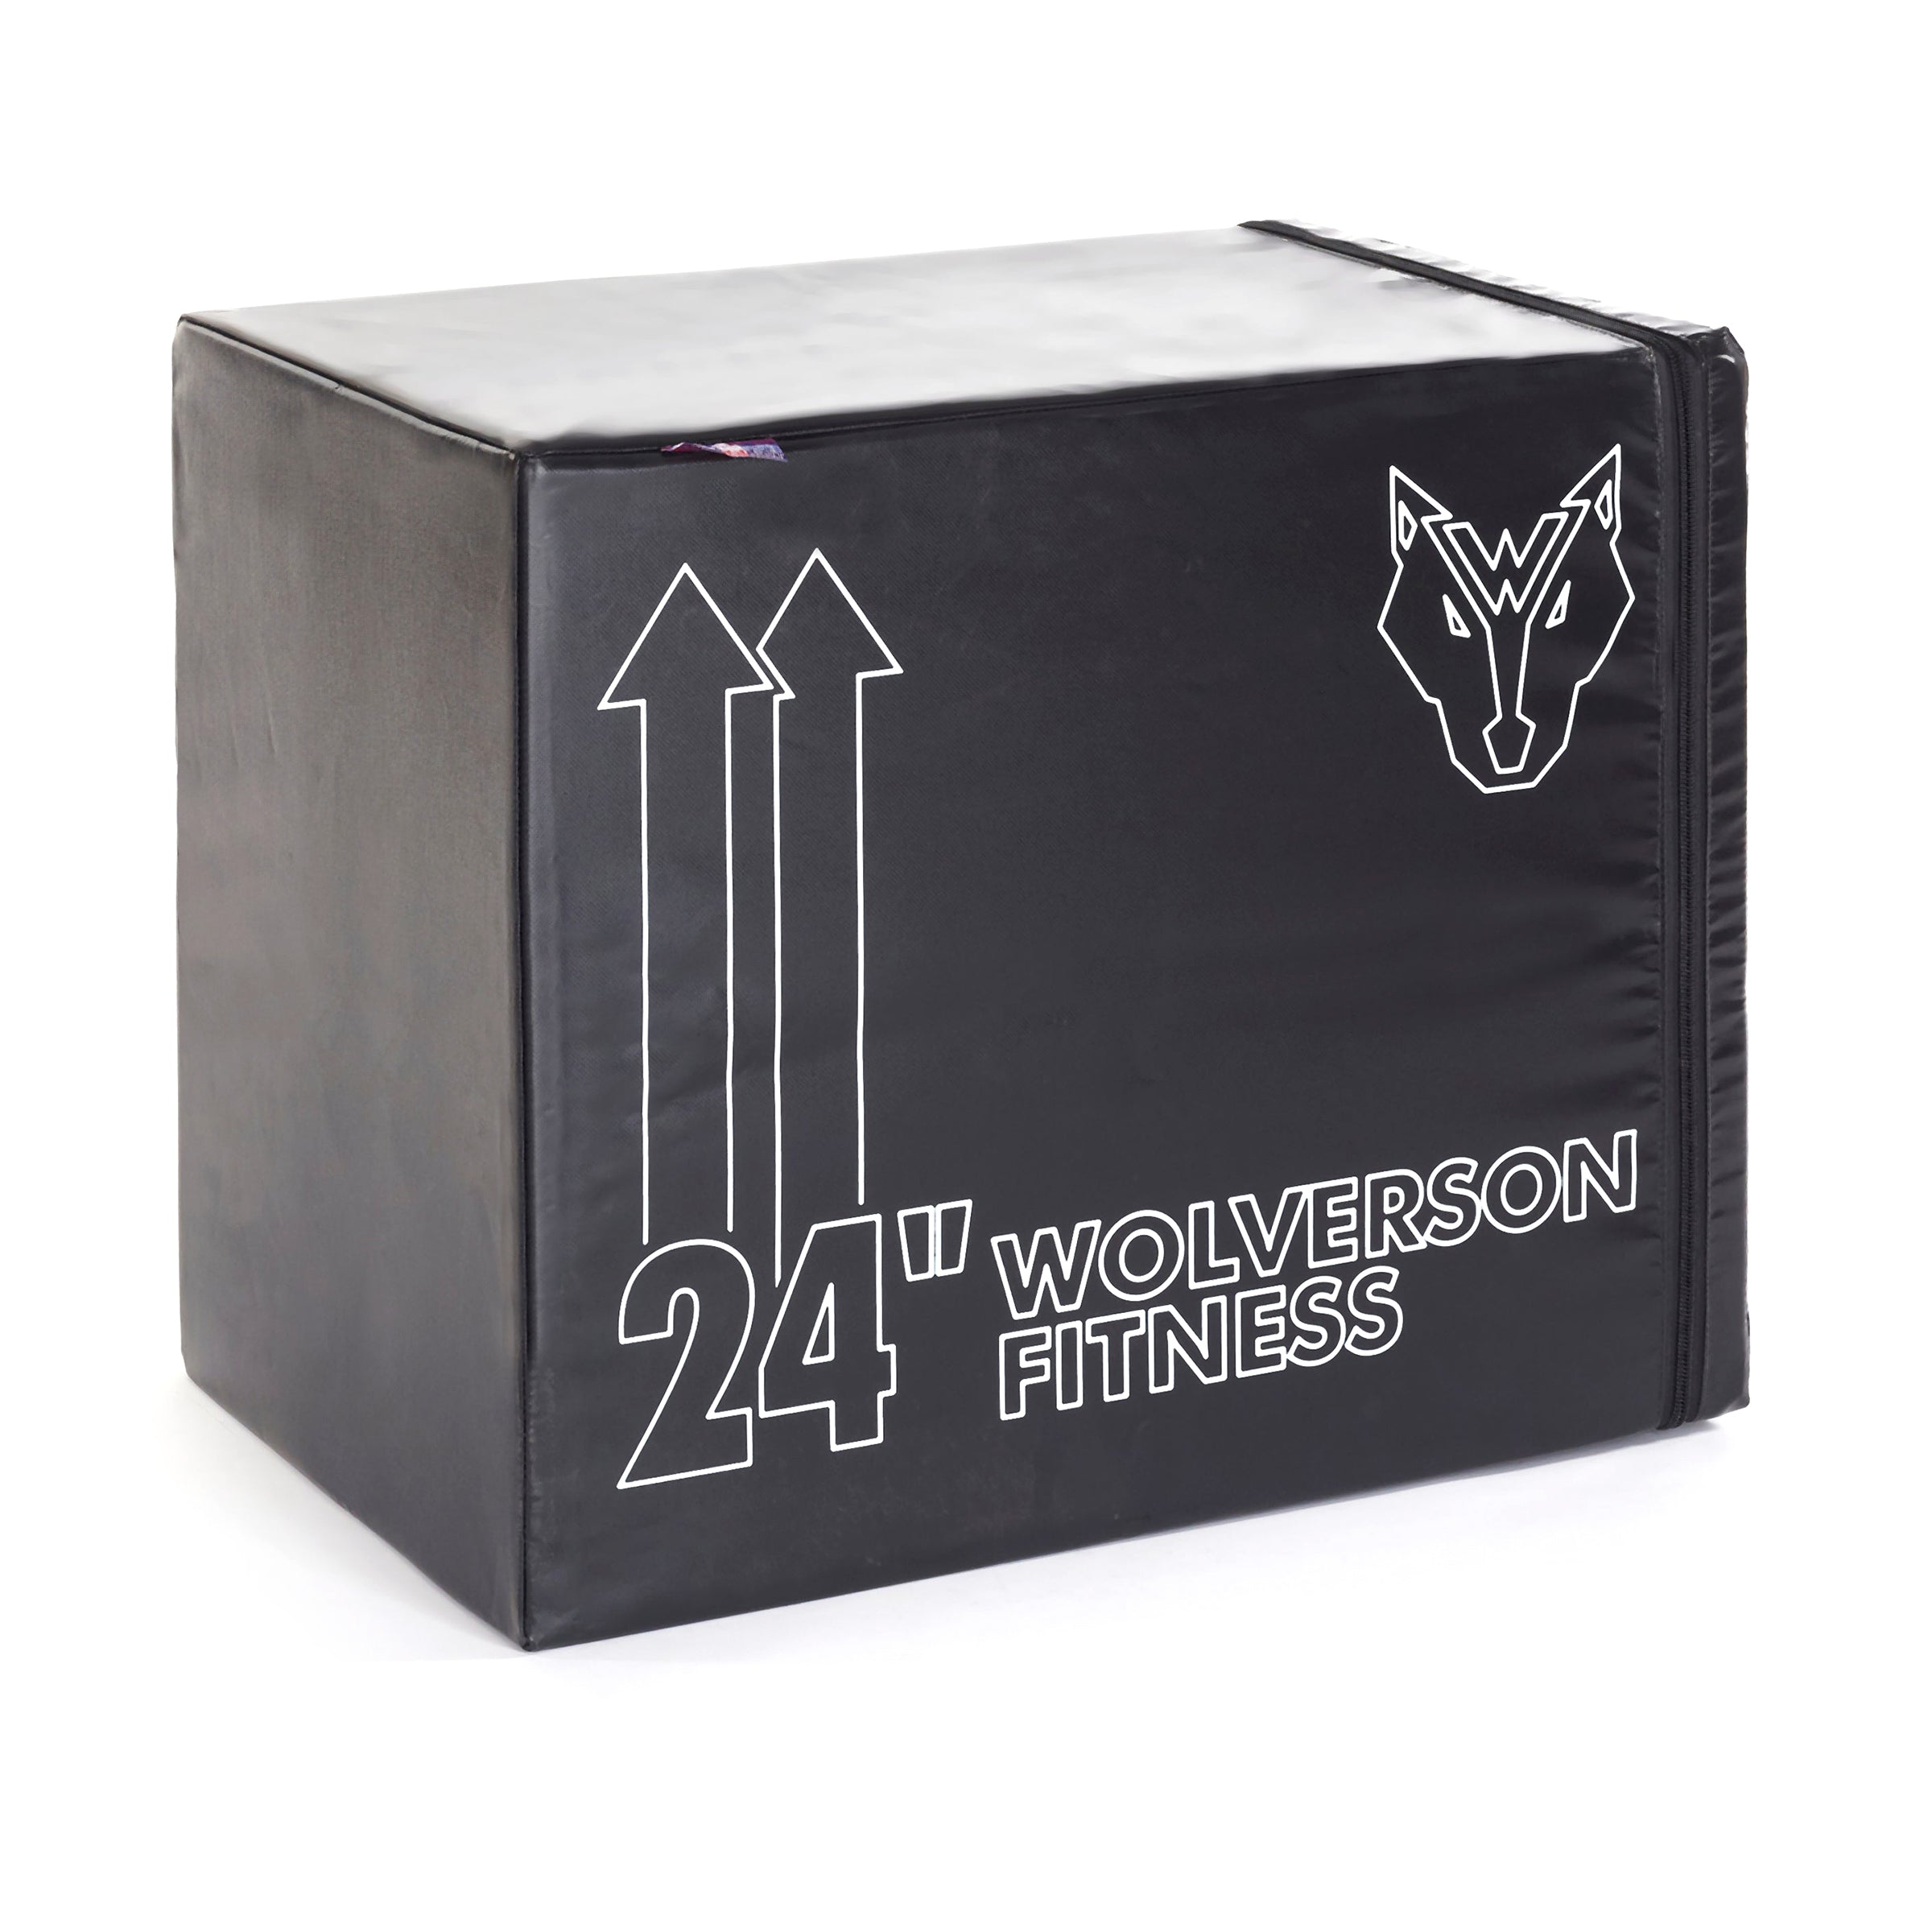 Wolverson™ 3-in-1 Soft Shell Plyo Box - Wolverson Fitness